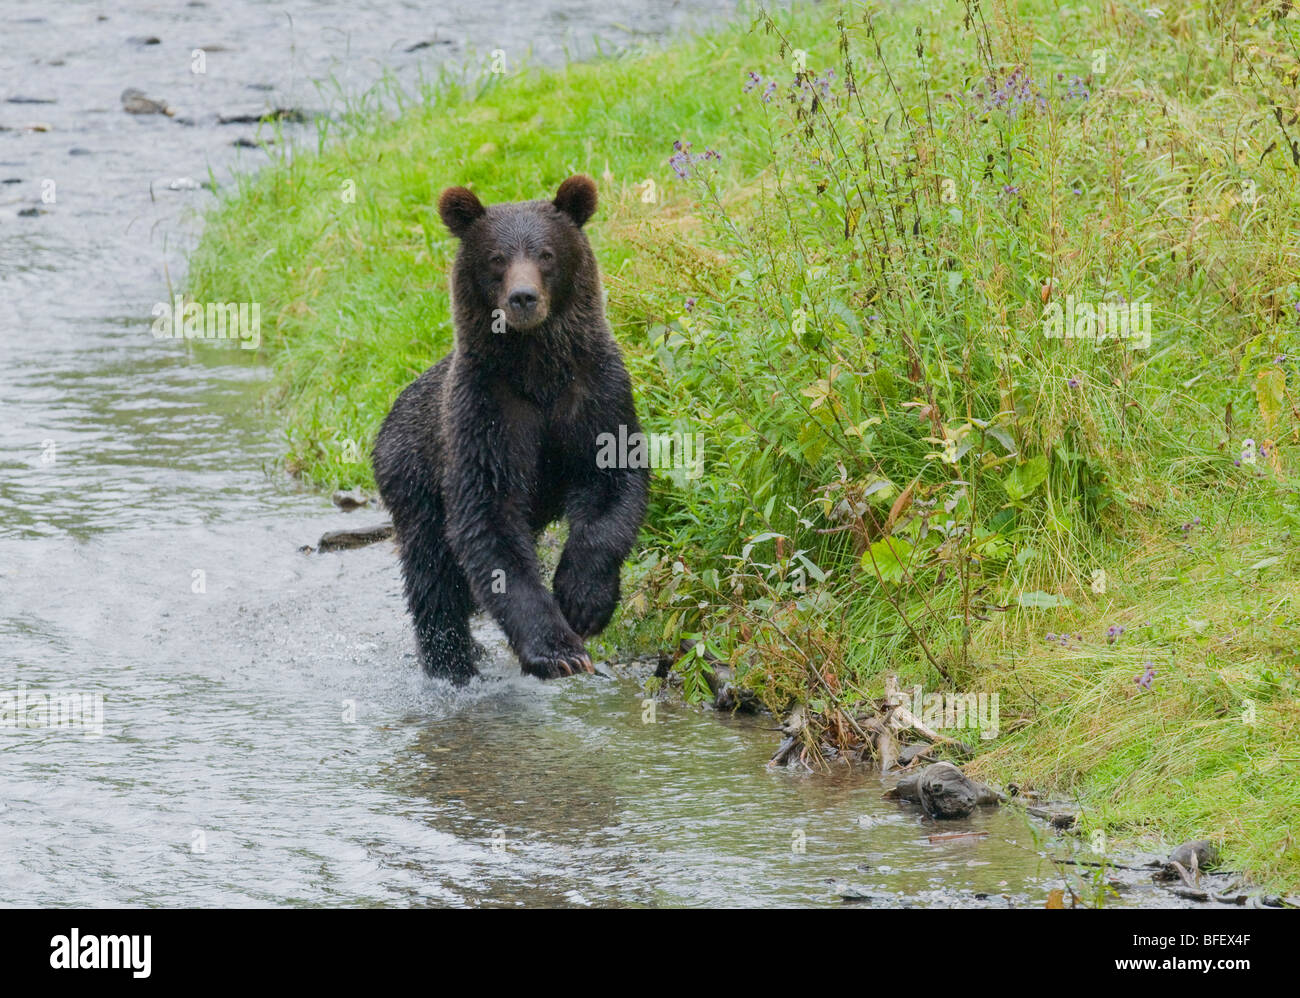 Grizzly Bear (Ursus arctos horribilis) Juvenile Running. Normally a solitary animal but in costal areas grizzly congregates alon Stock Photo